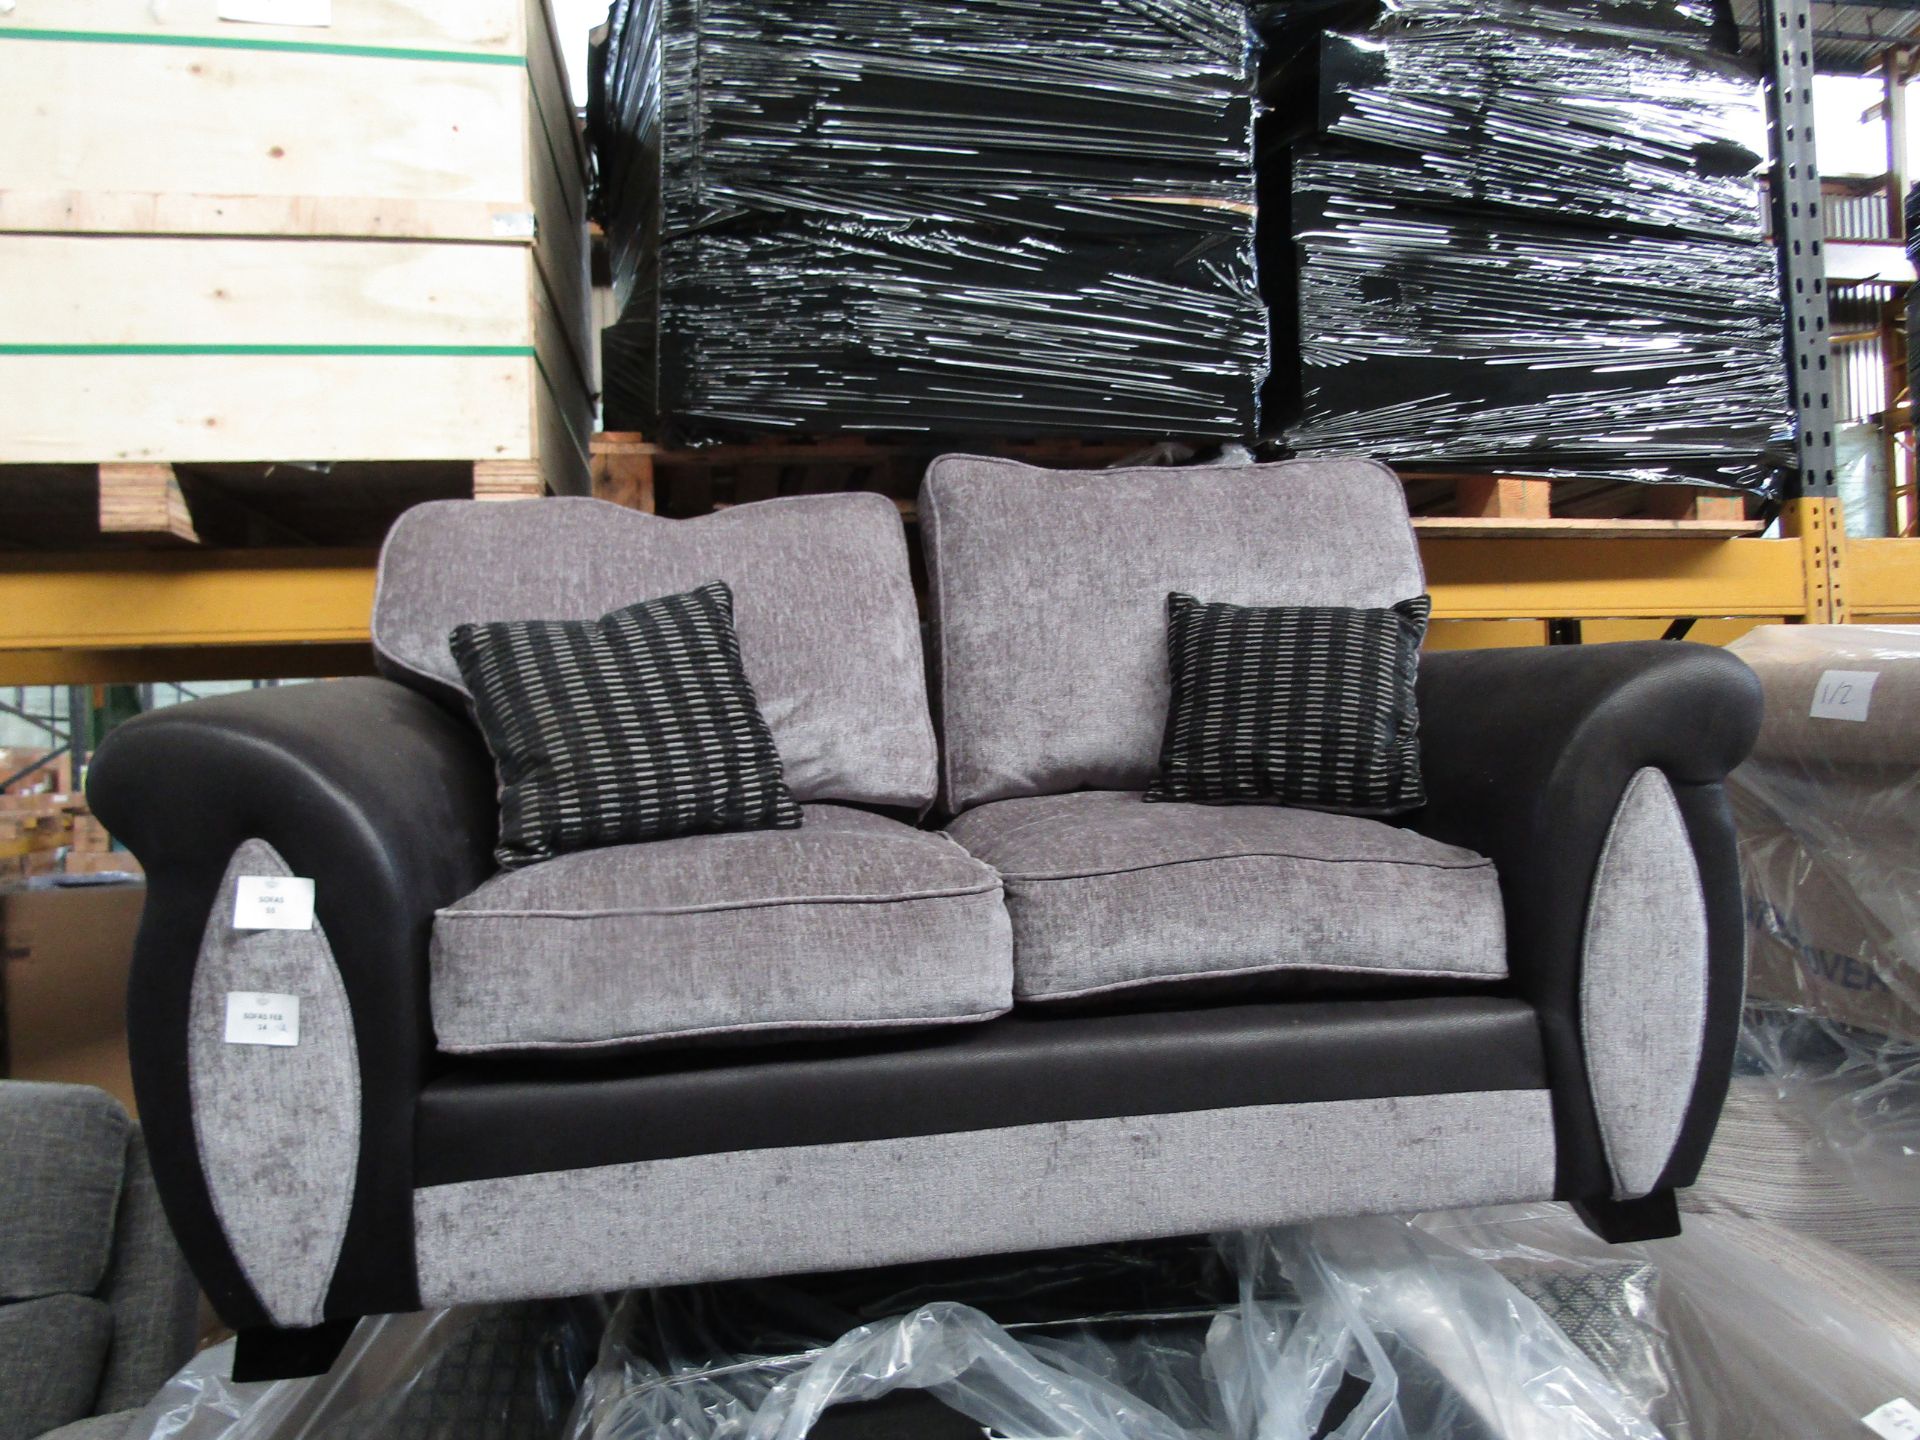 2 Seater grey and Black sofa, looks in good condition upon quick inspection